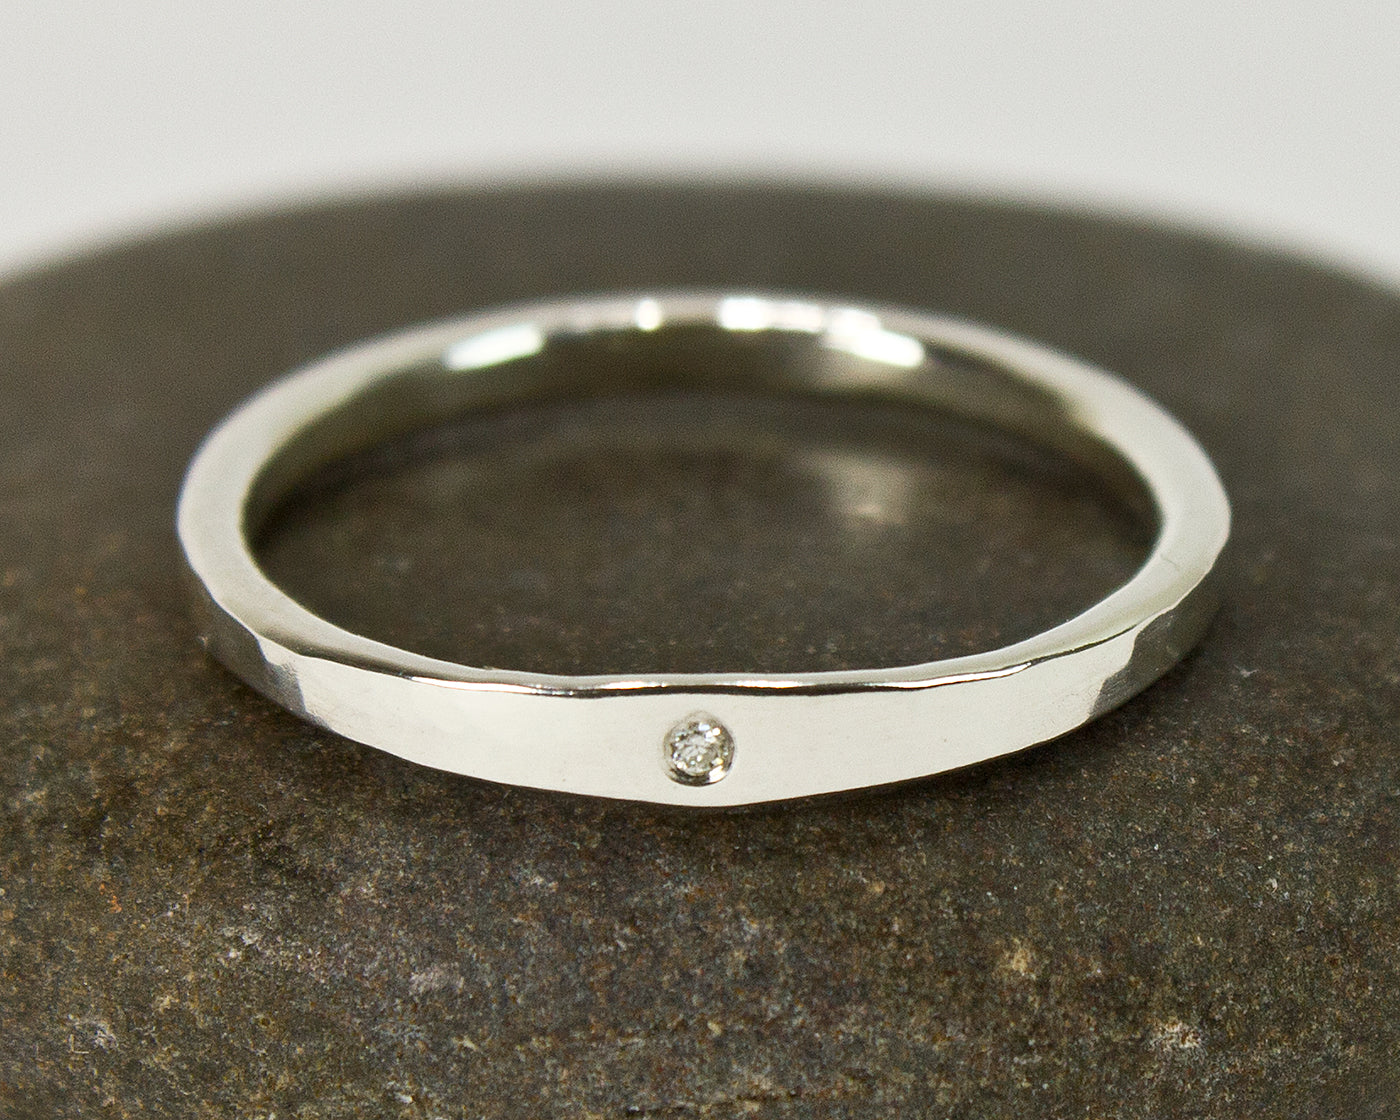 Minimalist Engagement Ring featured on Wedding Know-How